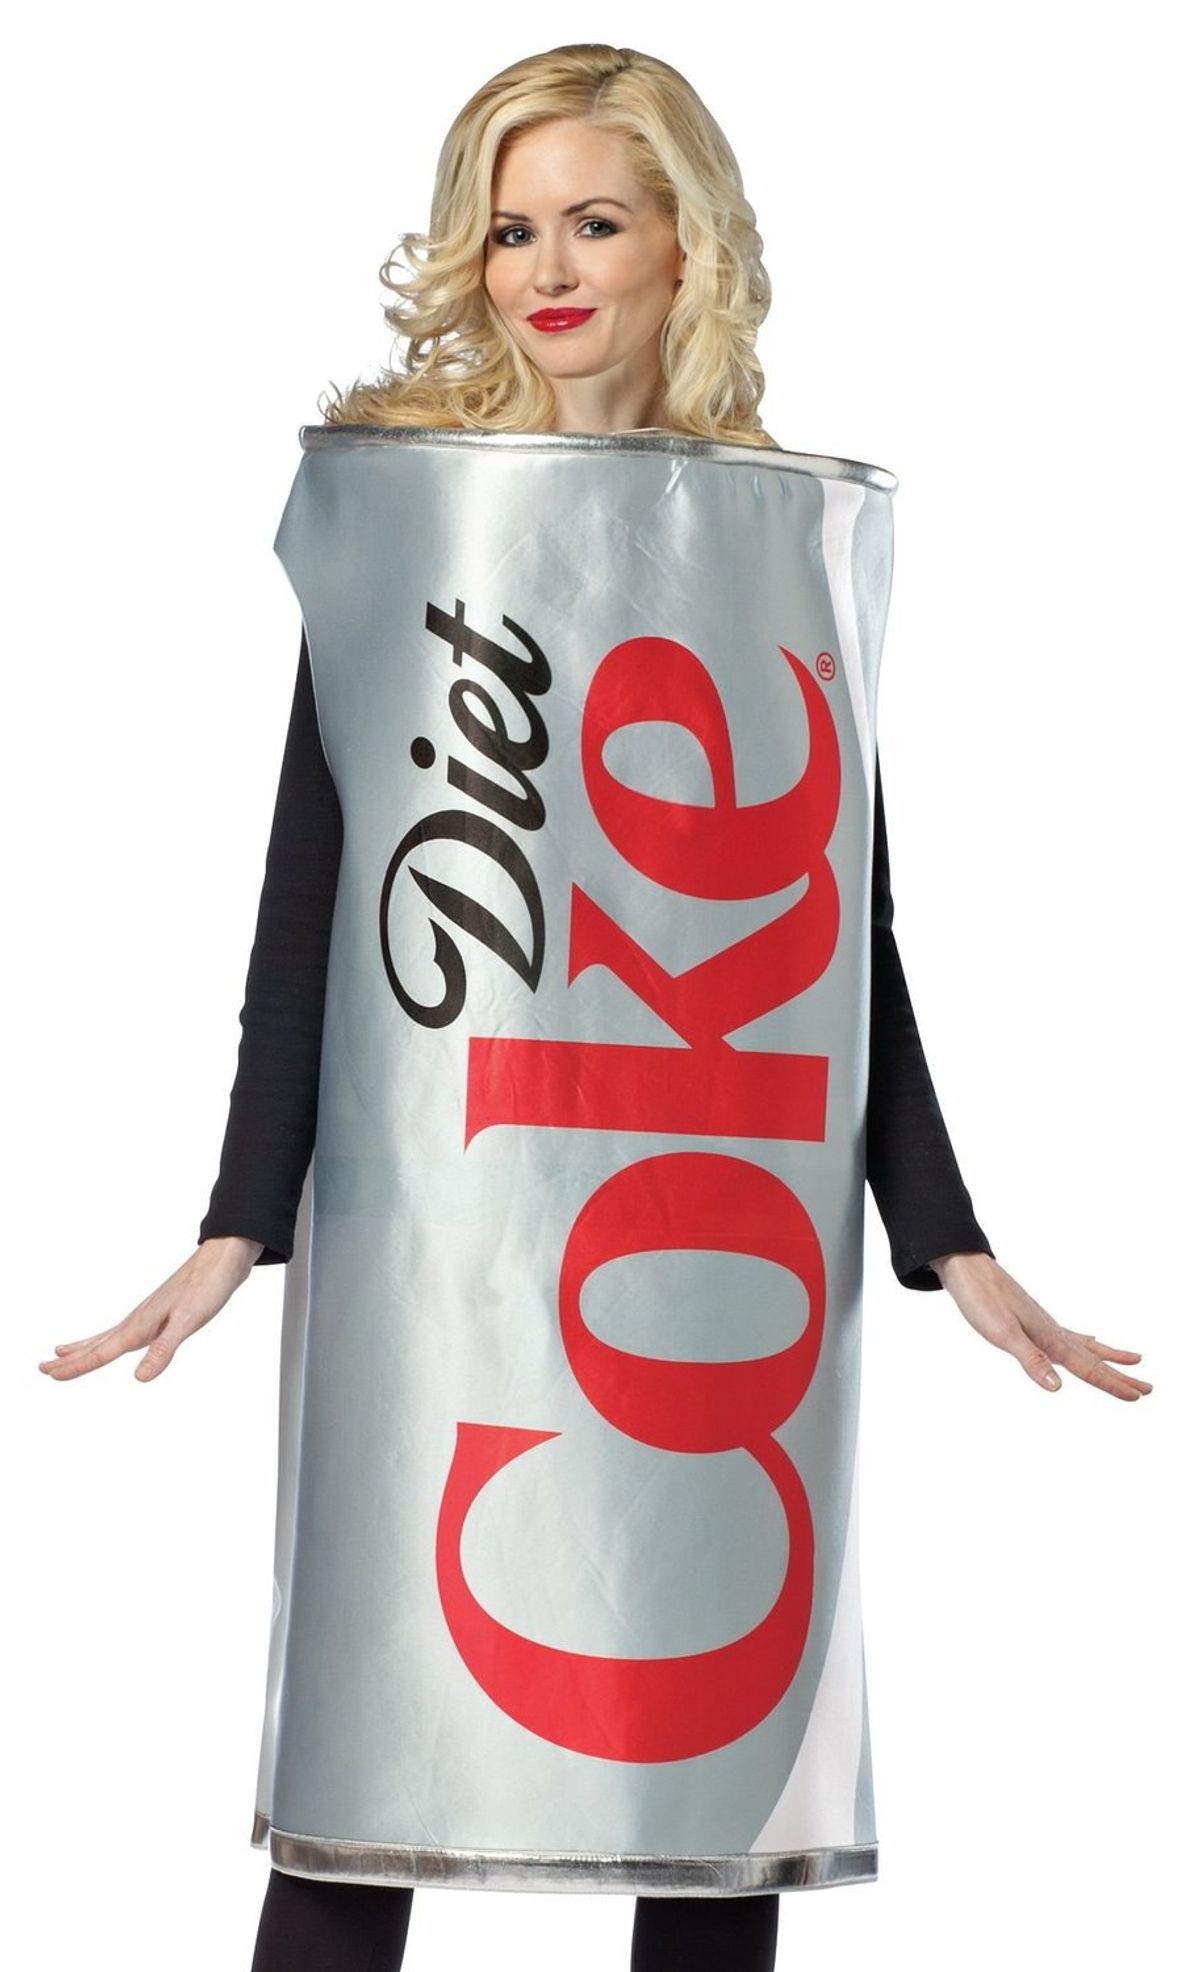 8 Confessions Of Diet Coke Lovers